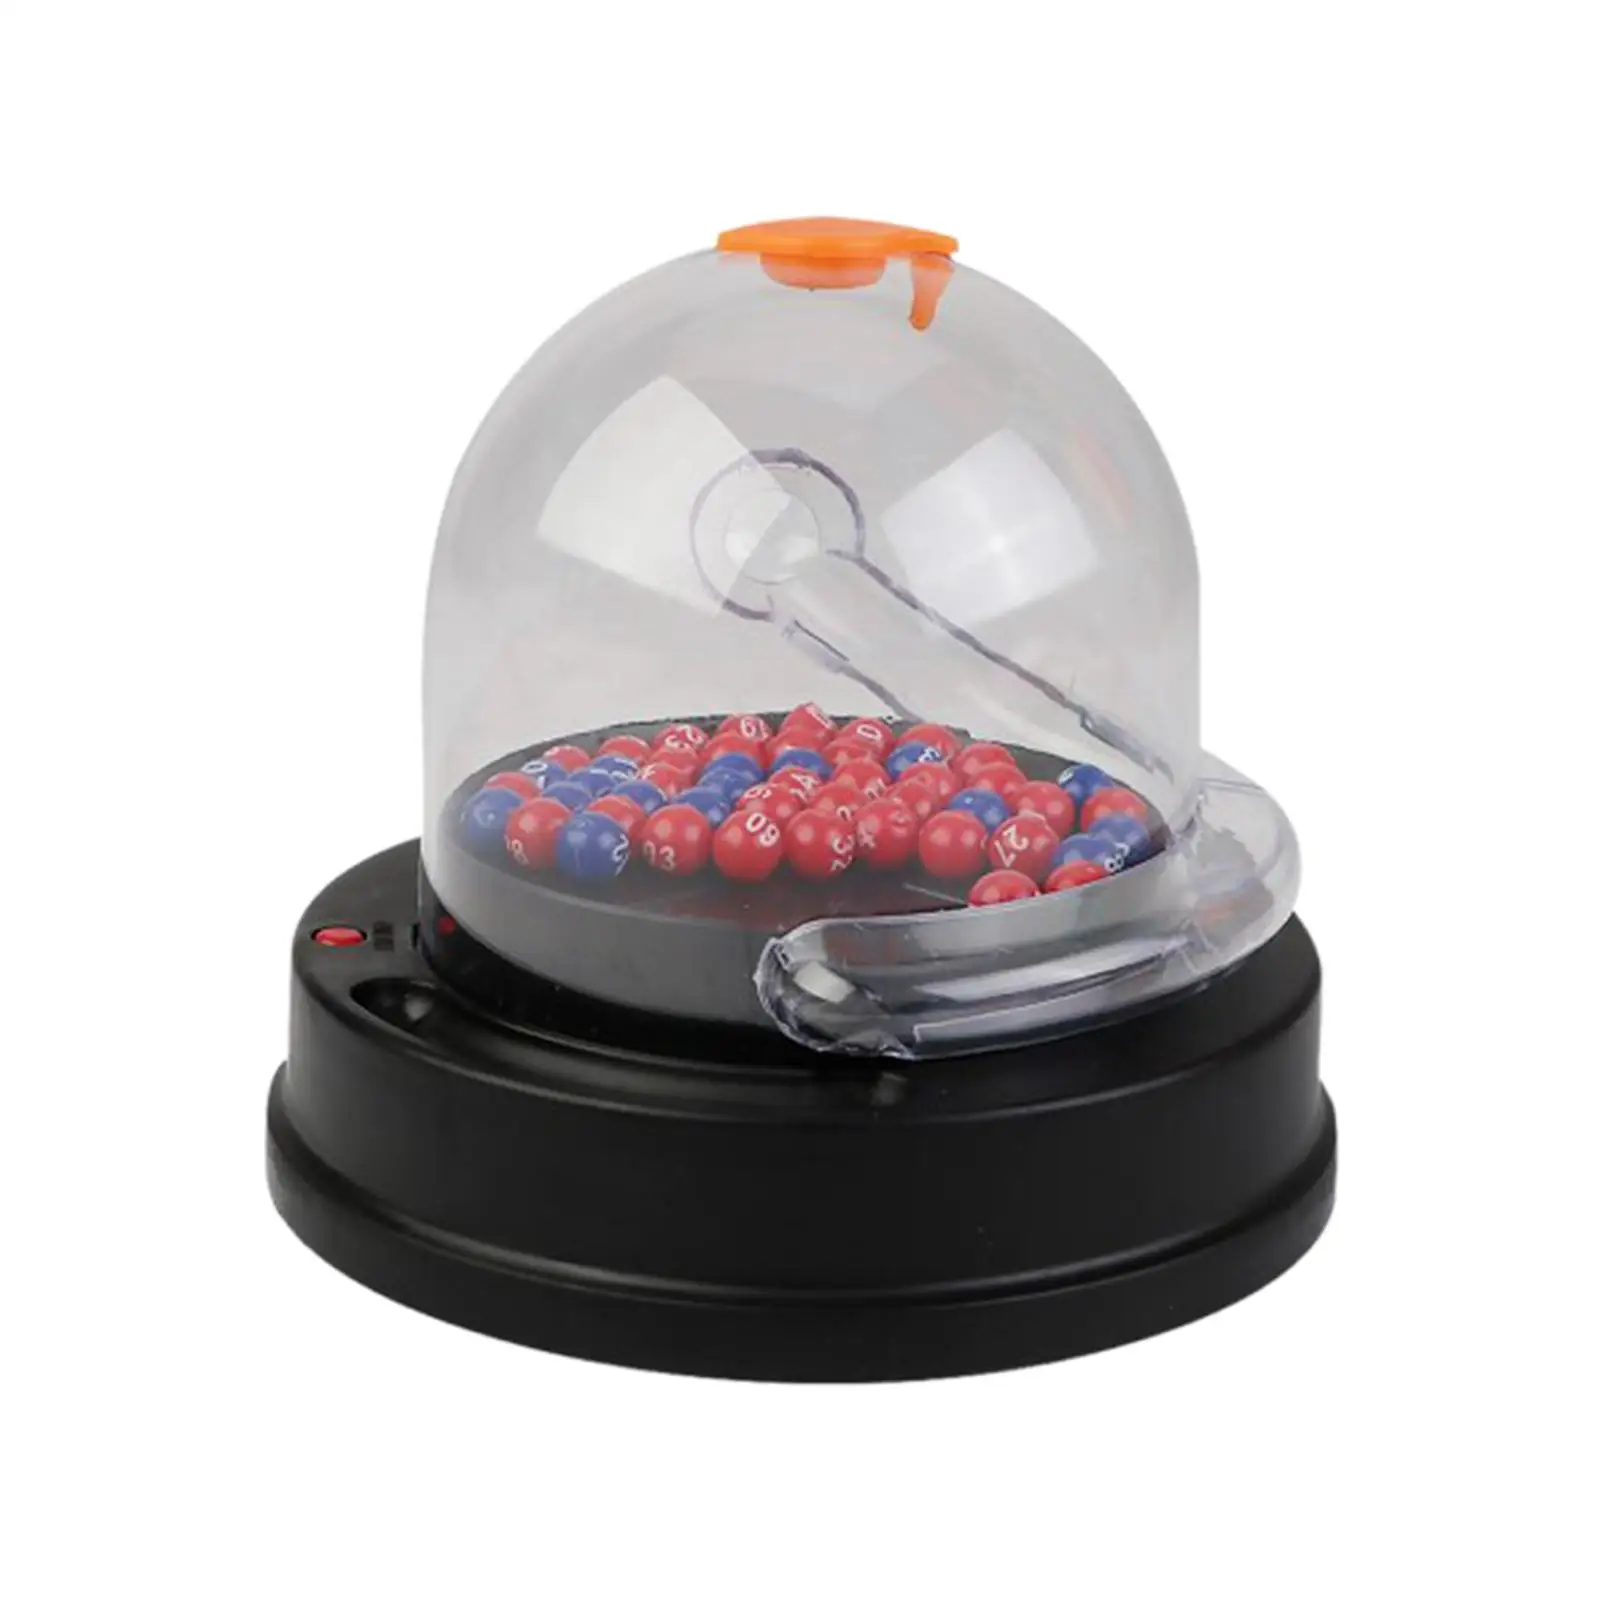 Electric Lottery Toy with Balls Portable Bingo Machine Cage Game for Nightclub Recreational Activity Dancehall Restaurant